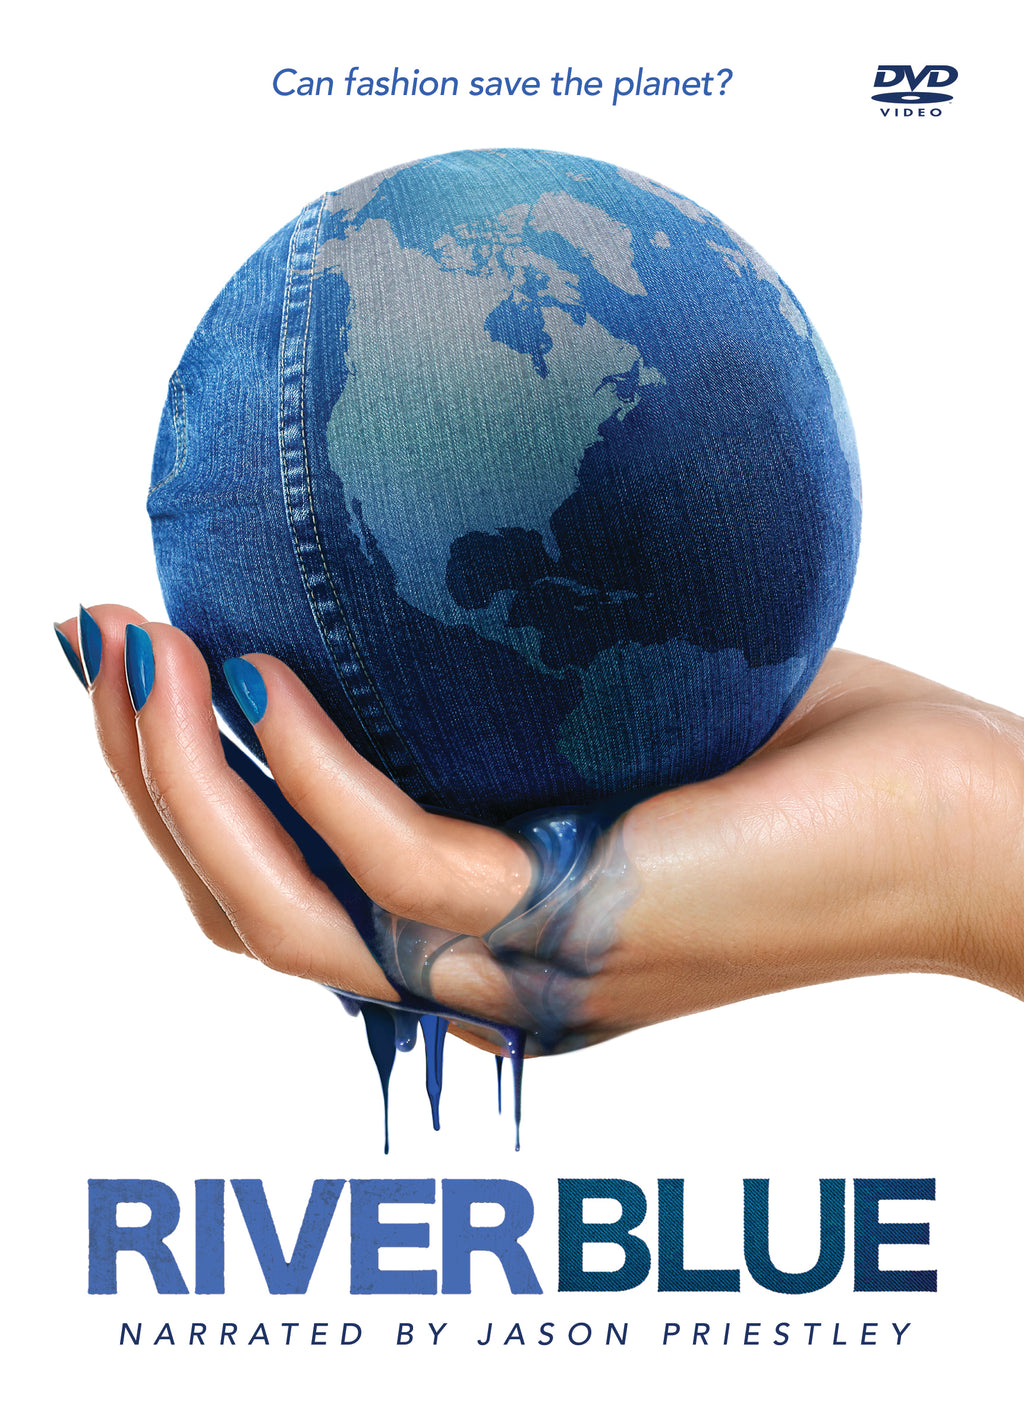 RIVERBLUE